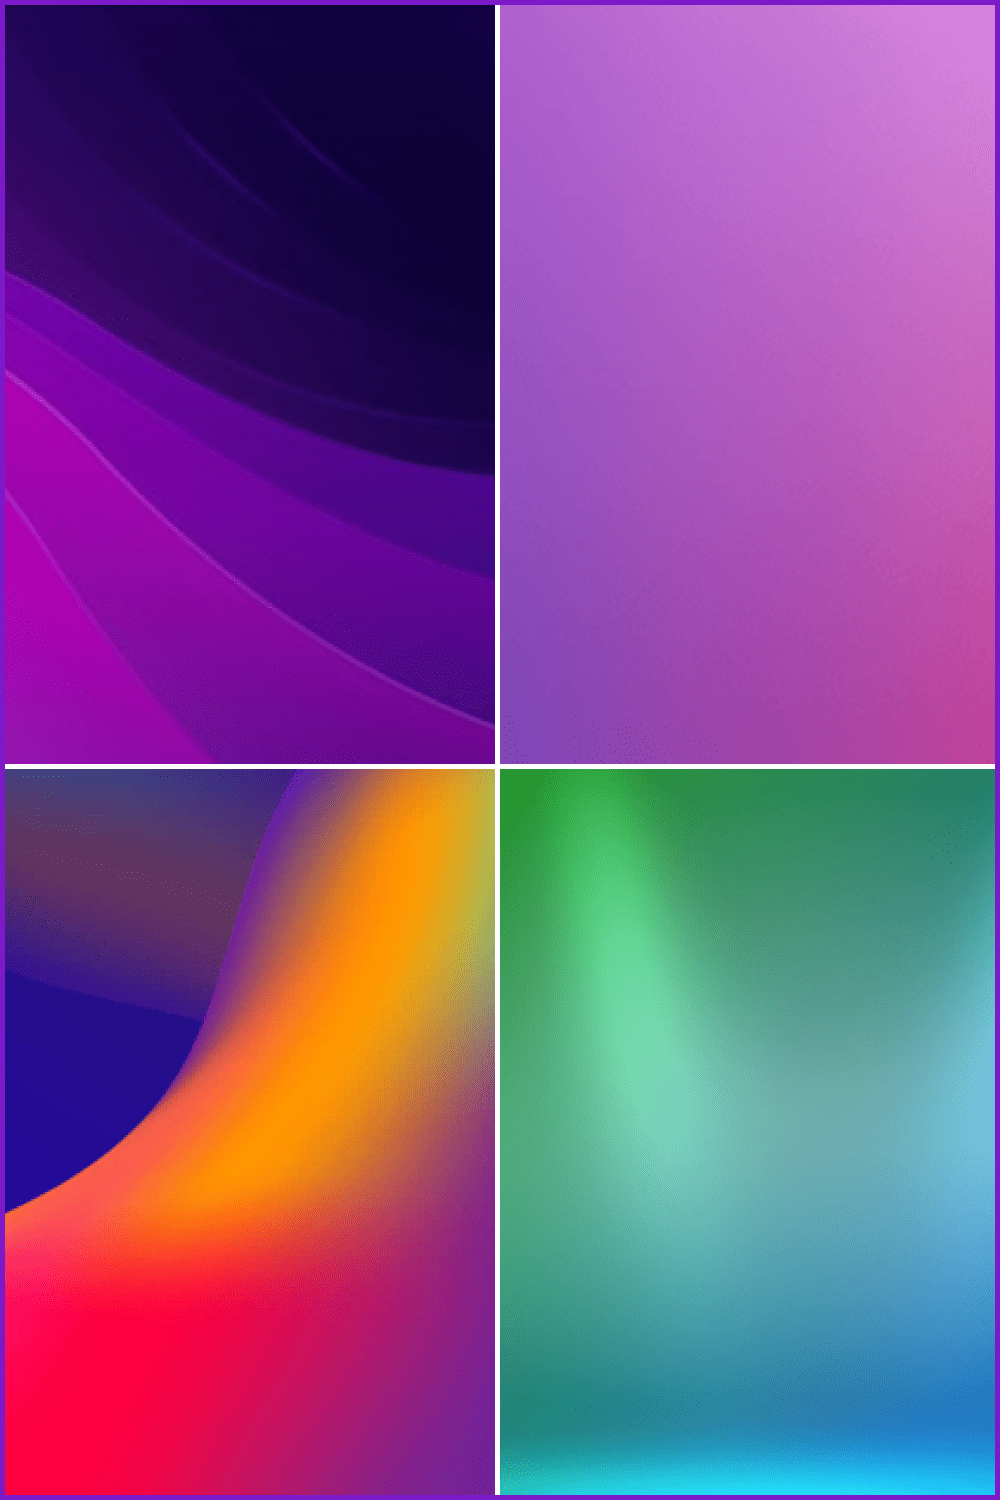 Where Gradients Can Be Used.